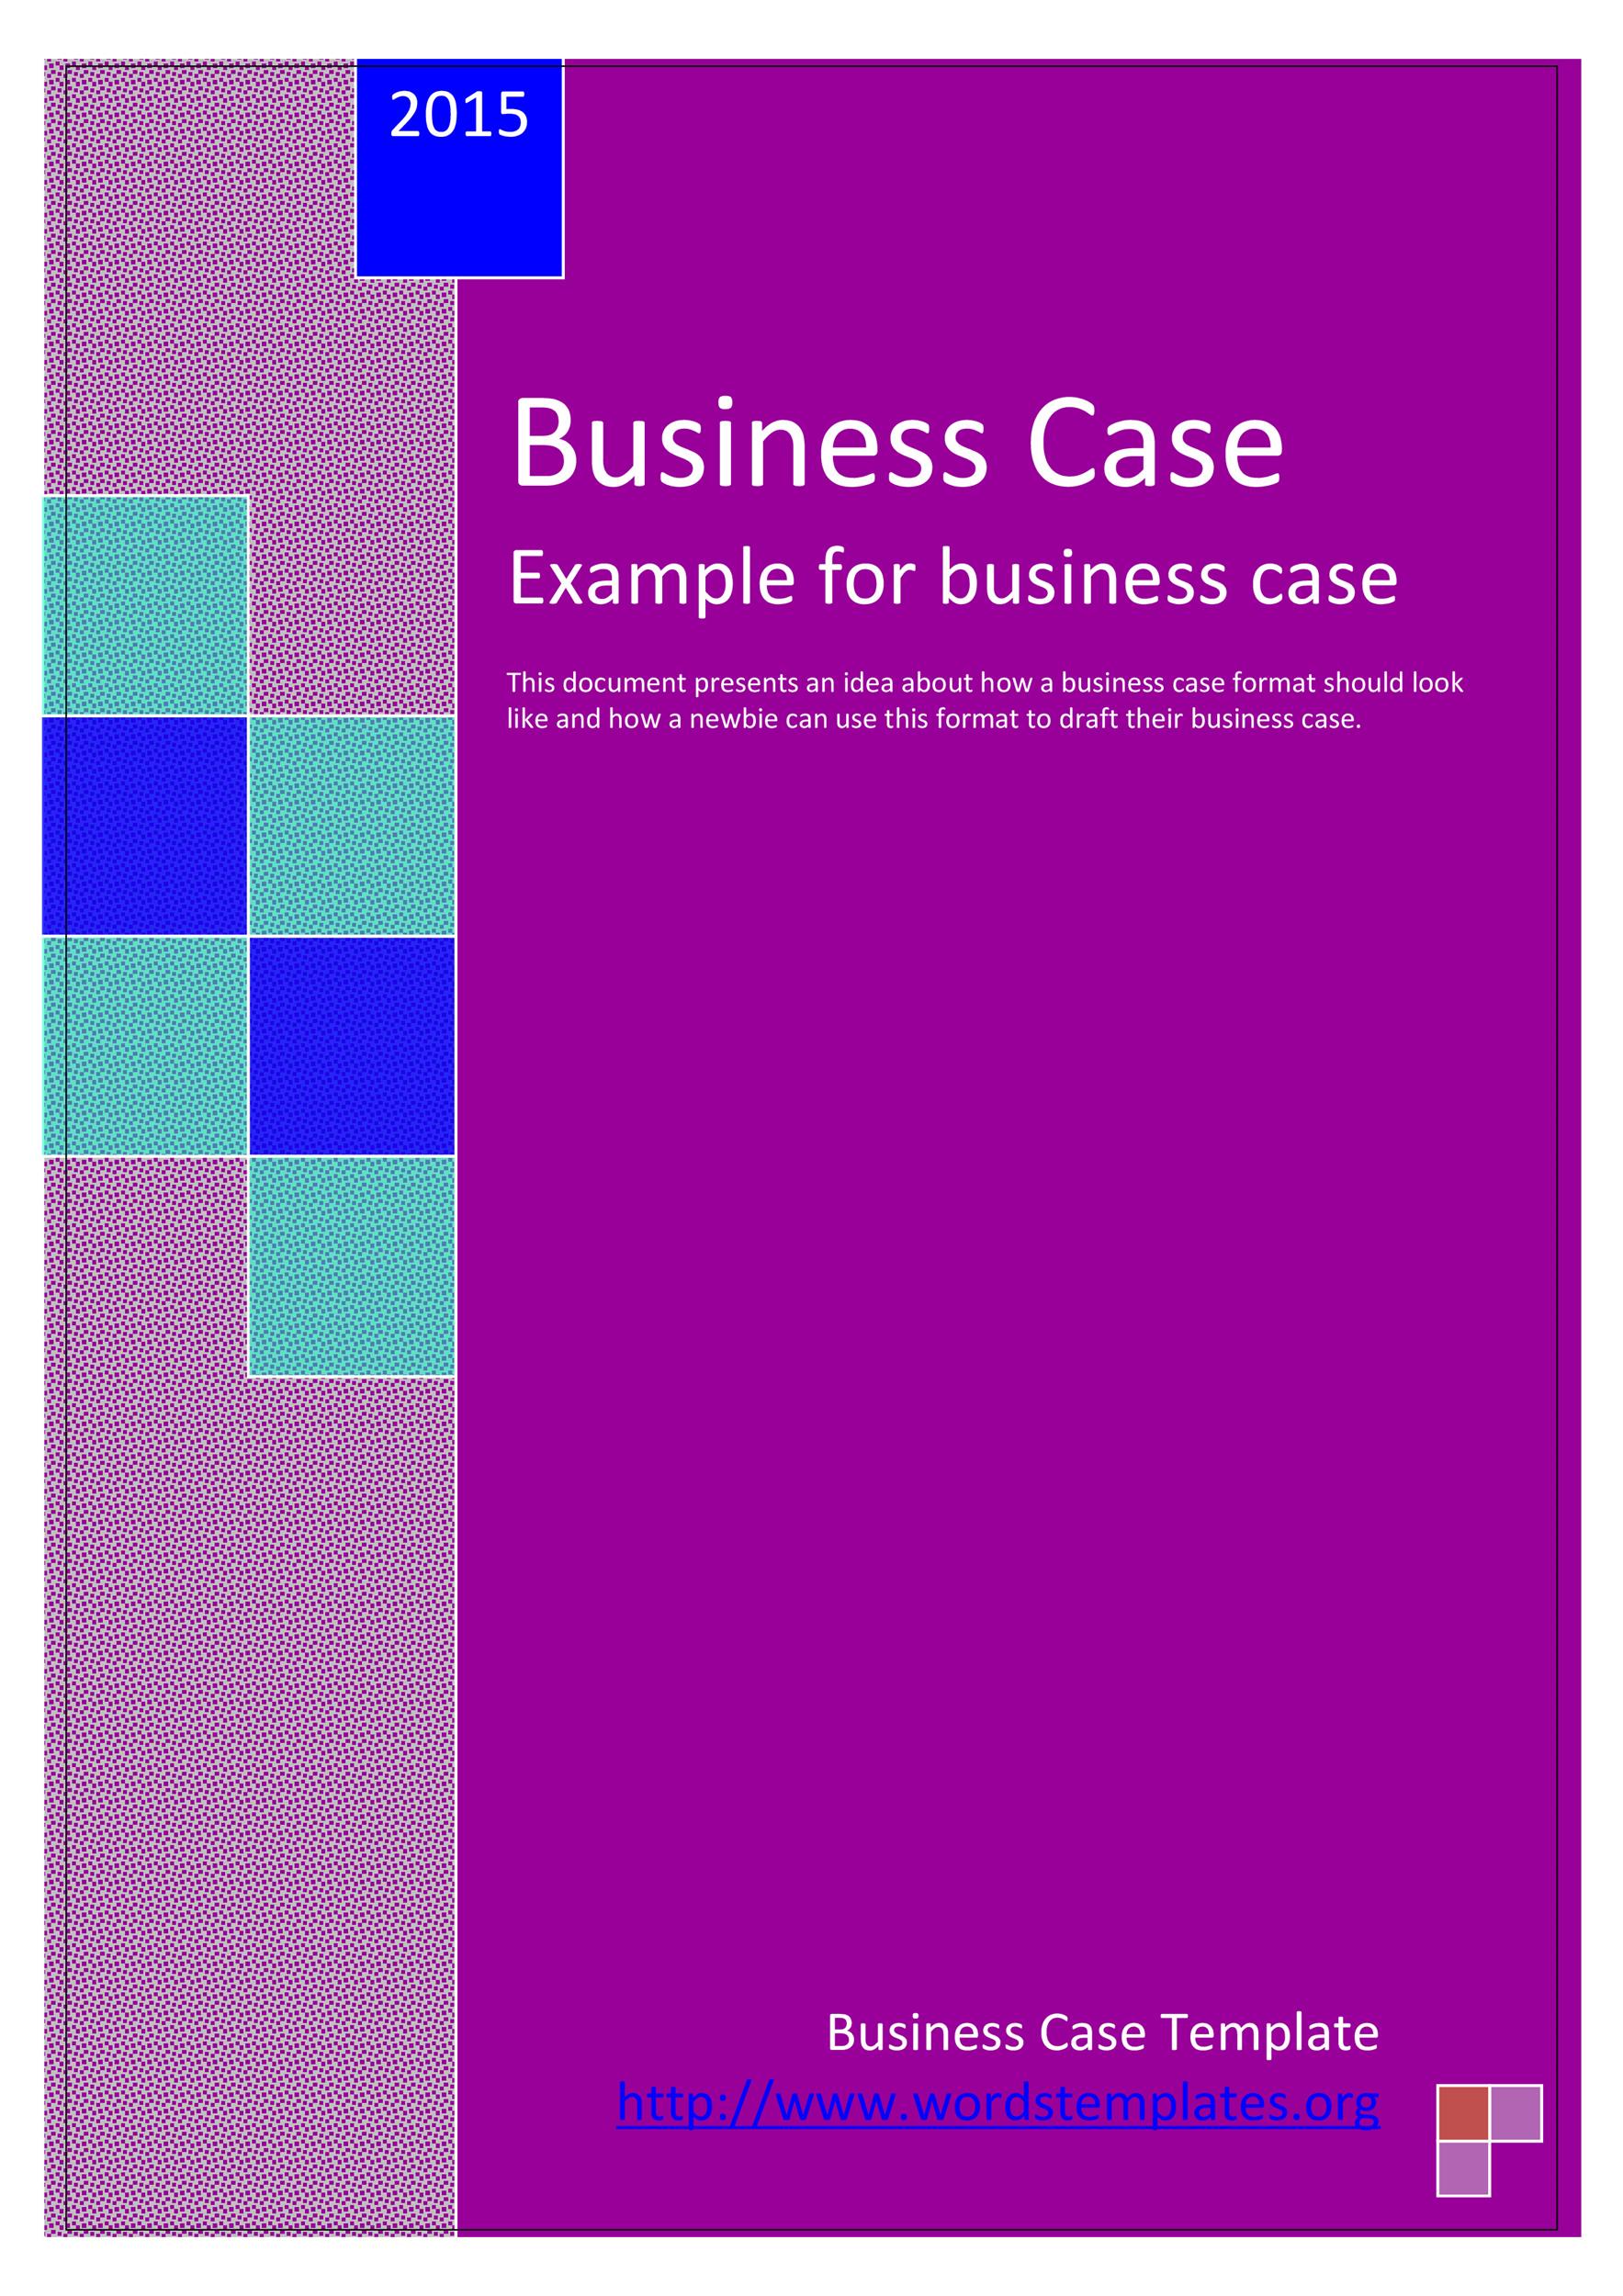 presentation templates for business case